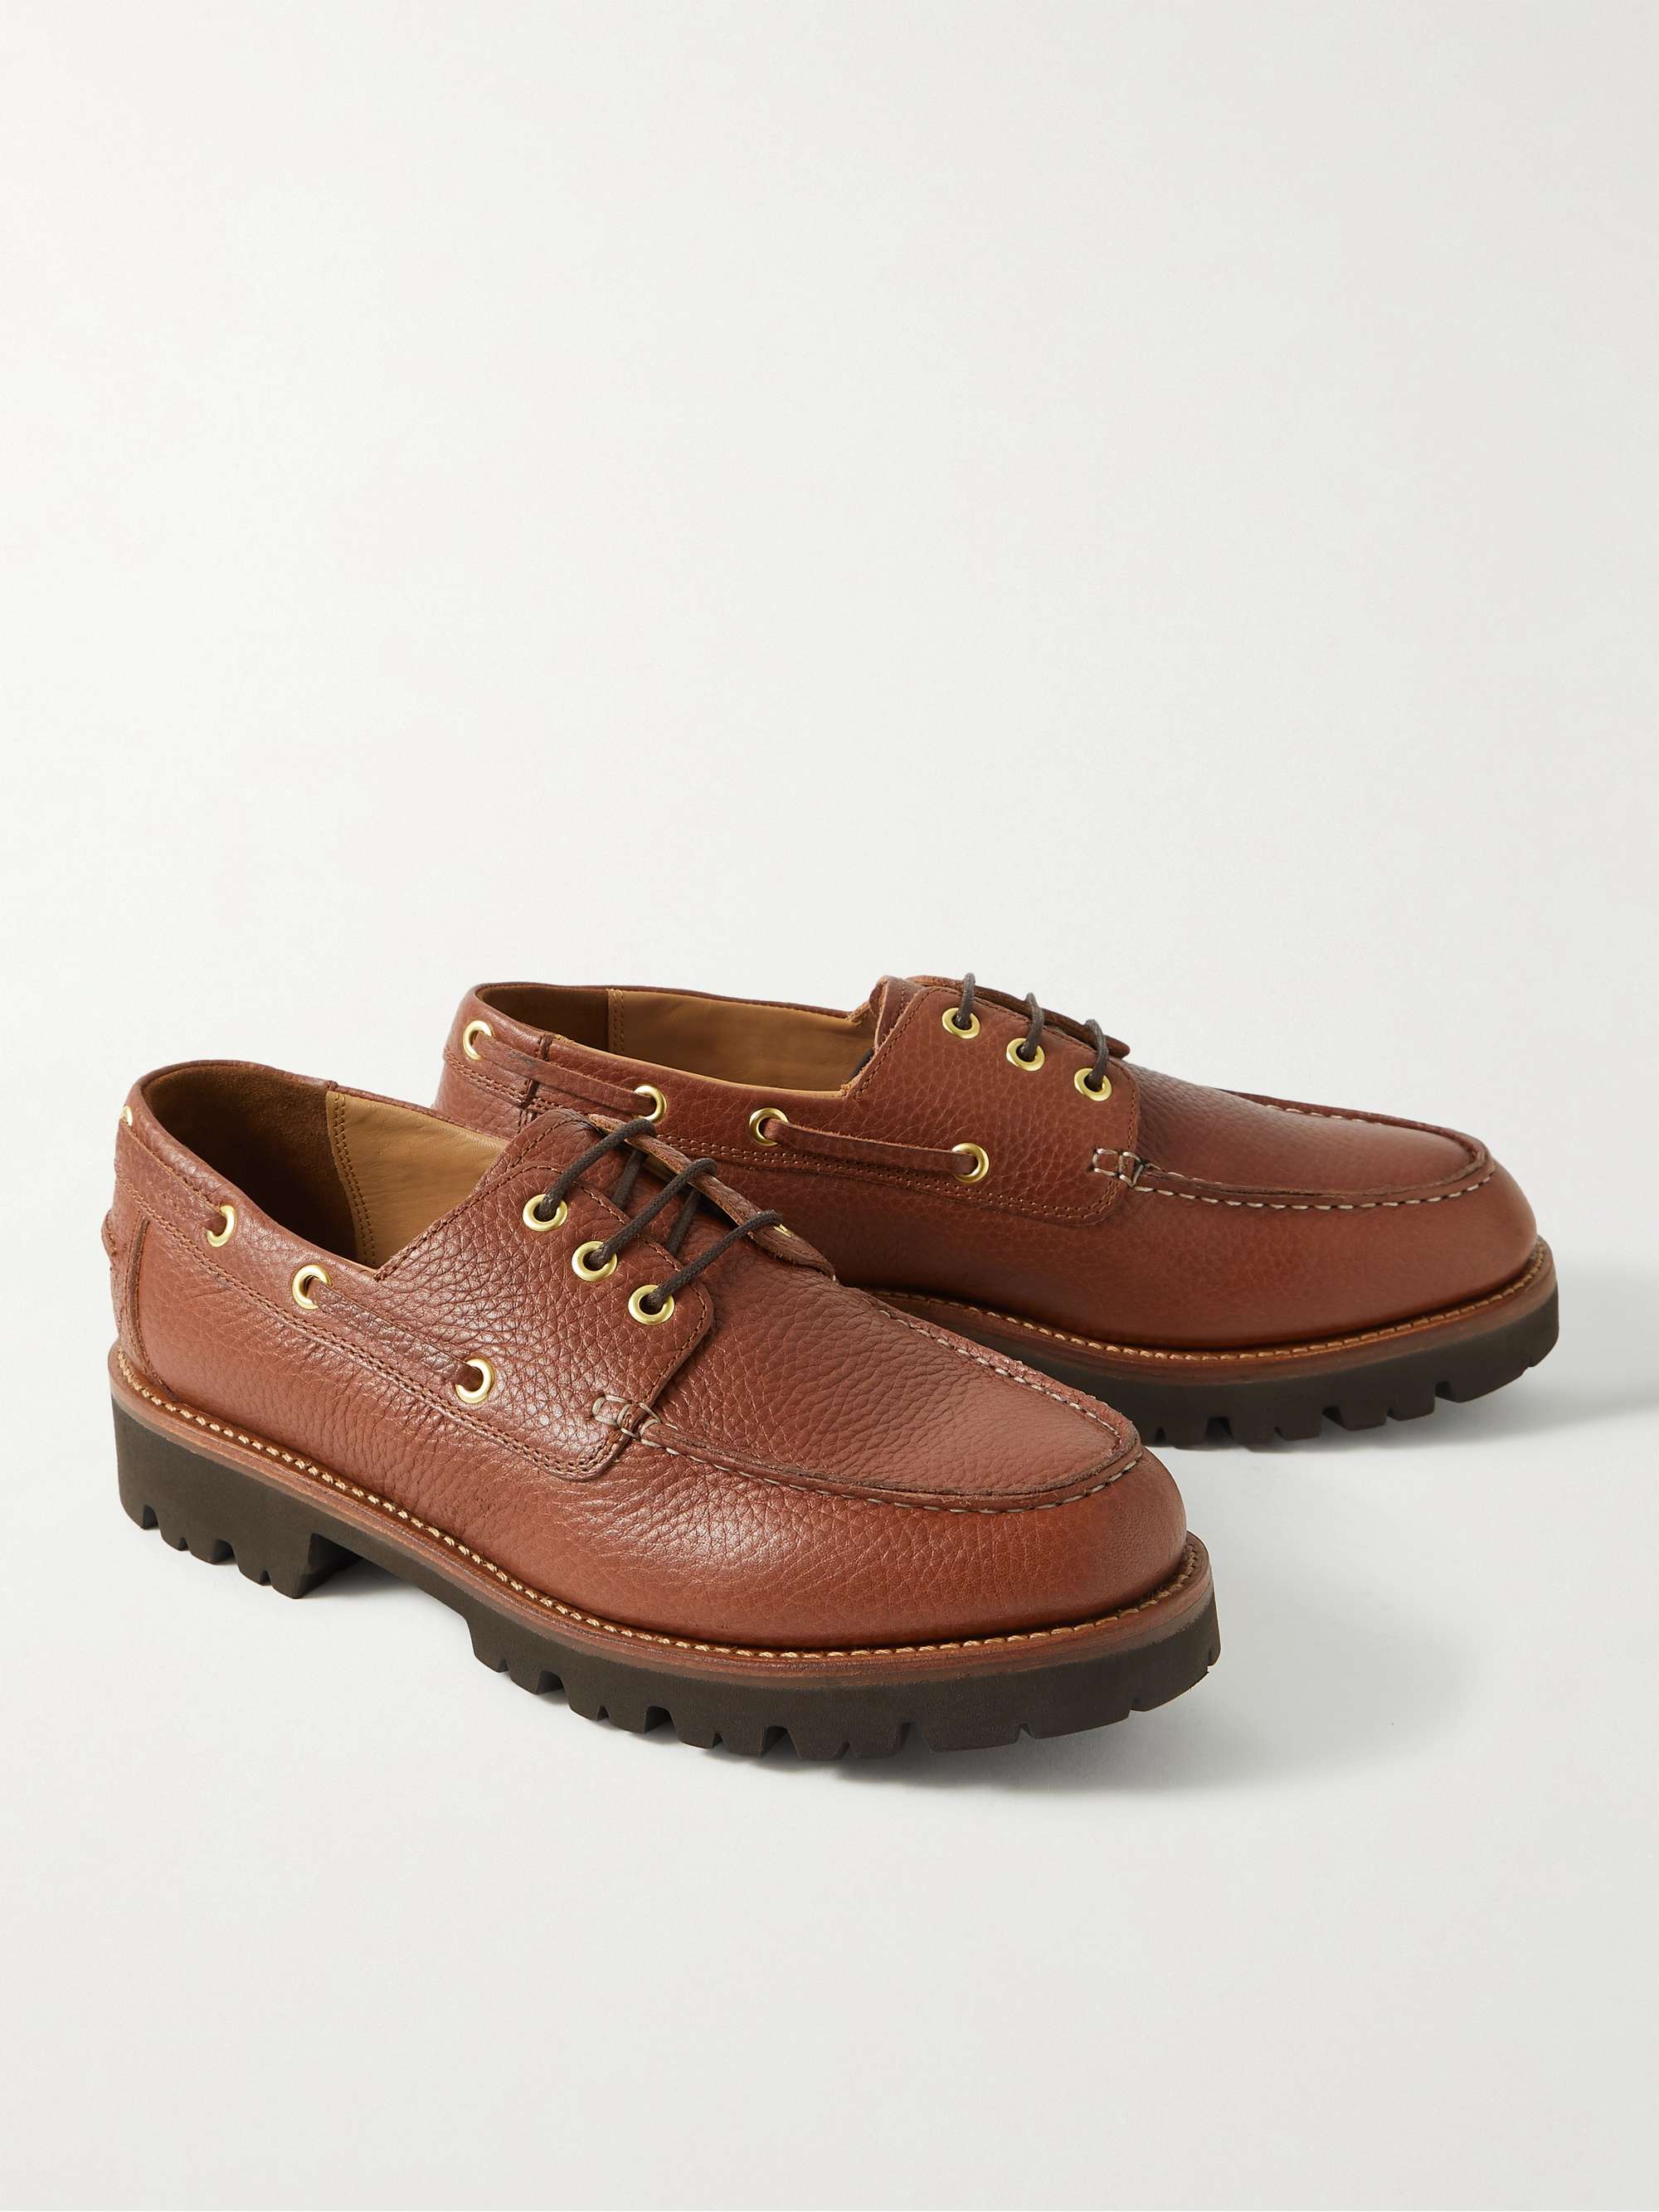 GRENSON Dempsey Full-Grain Leather Boat Shoes